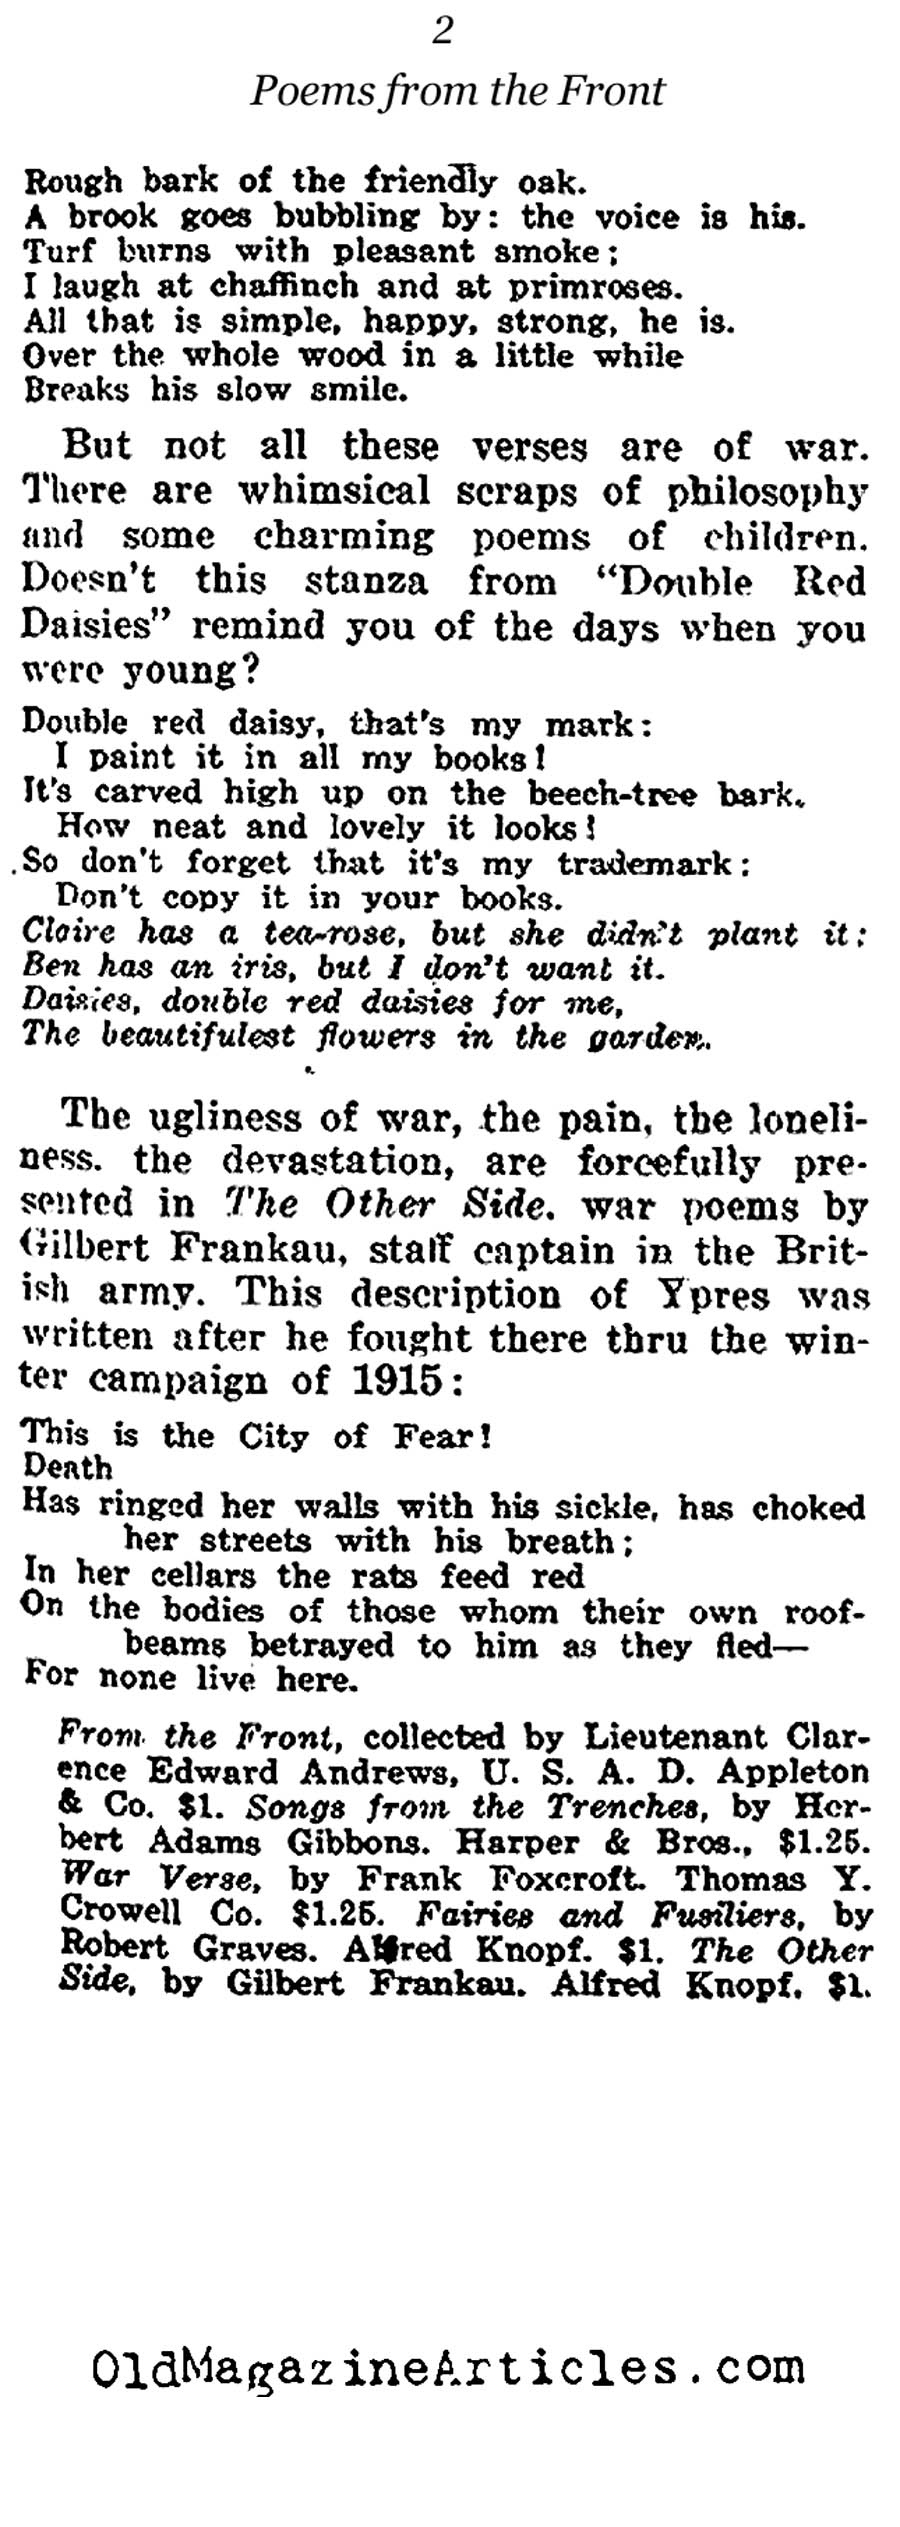 Three Collections of War Poetry Reviewed (The Independent, 1919)